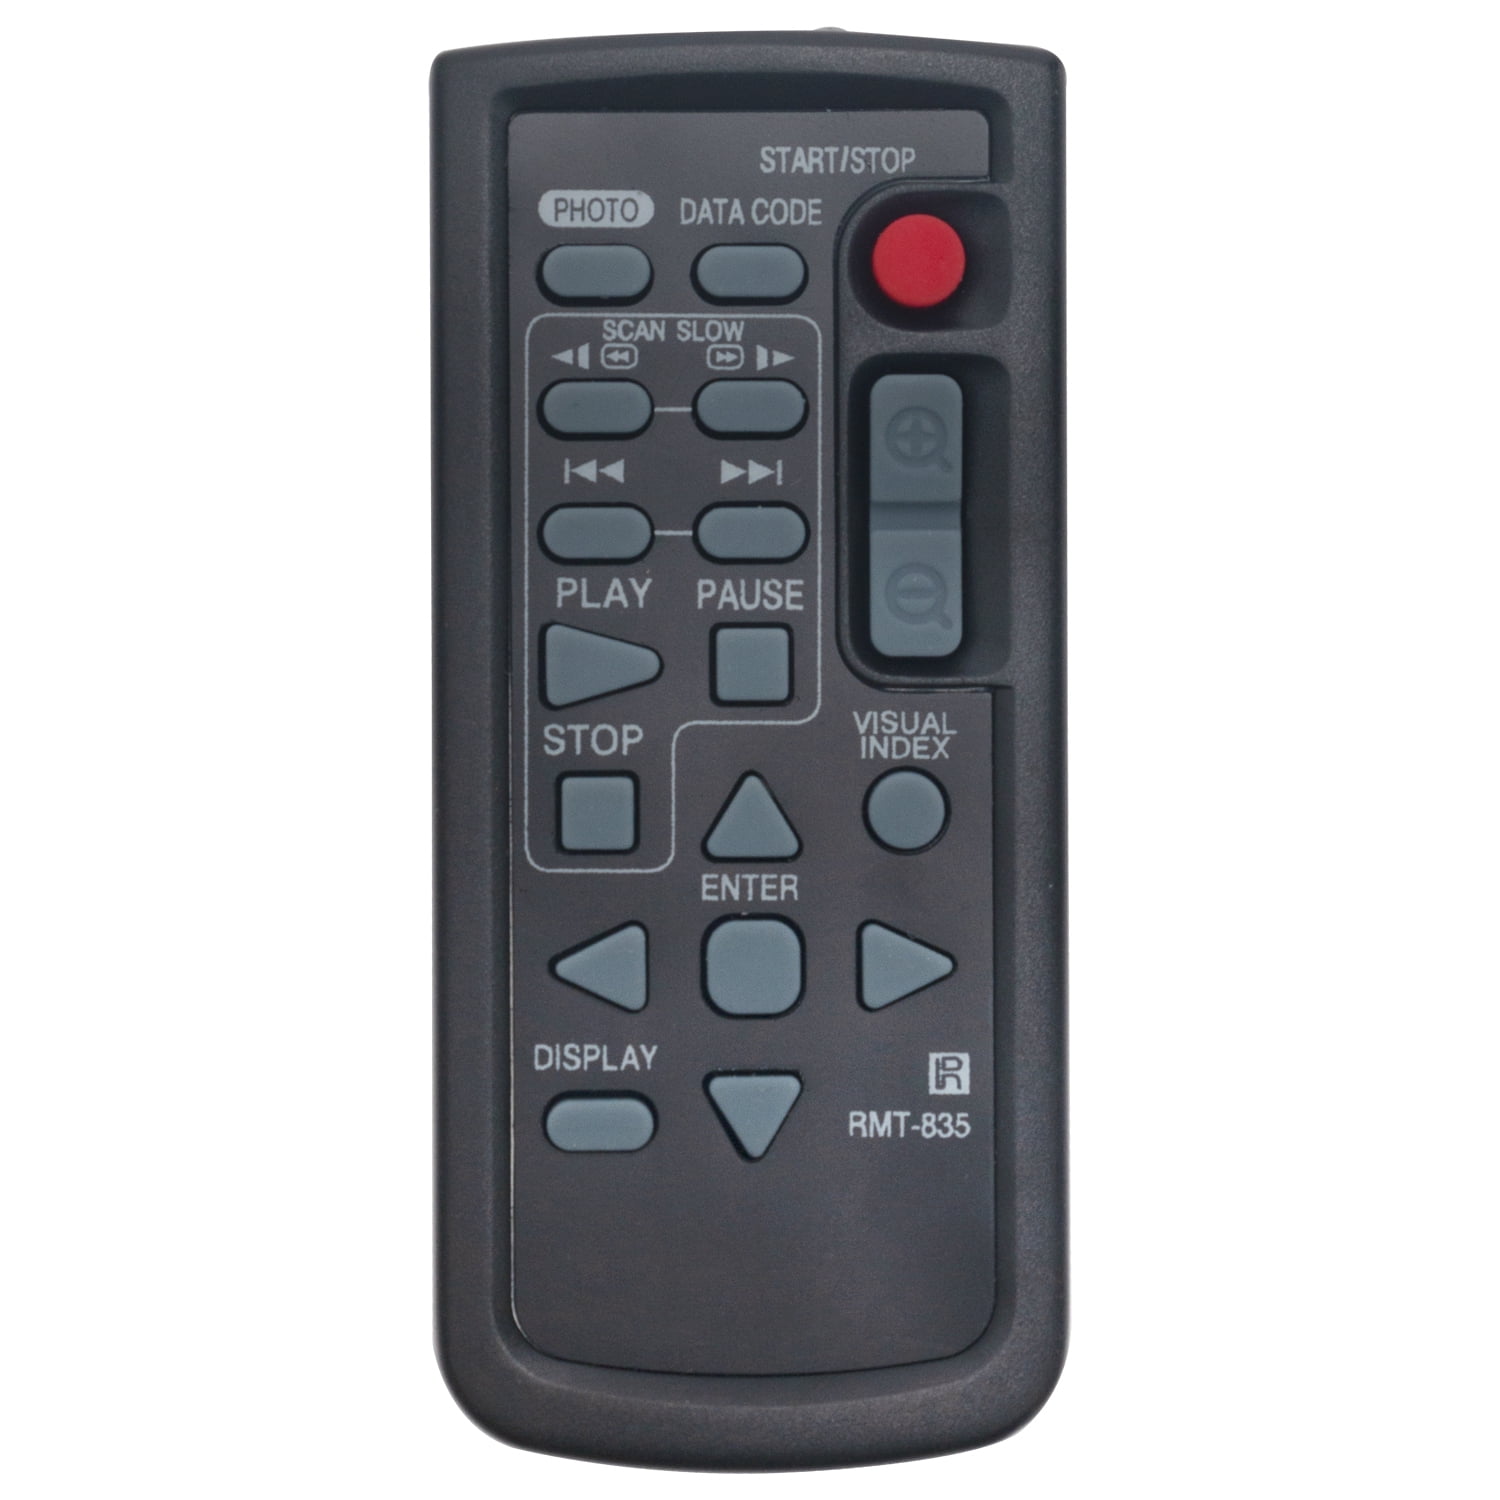 RMT-835 Remote Control Replace for Sony Tape Camcorder HDR-CX300E HDR ...